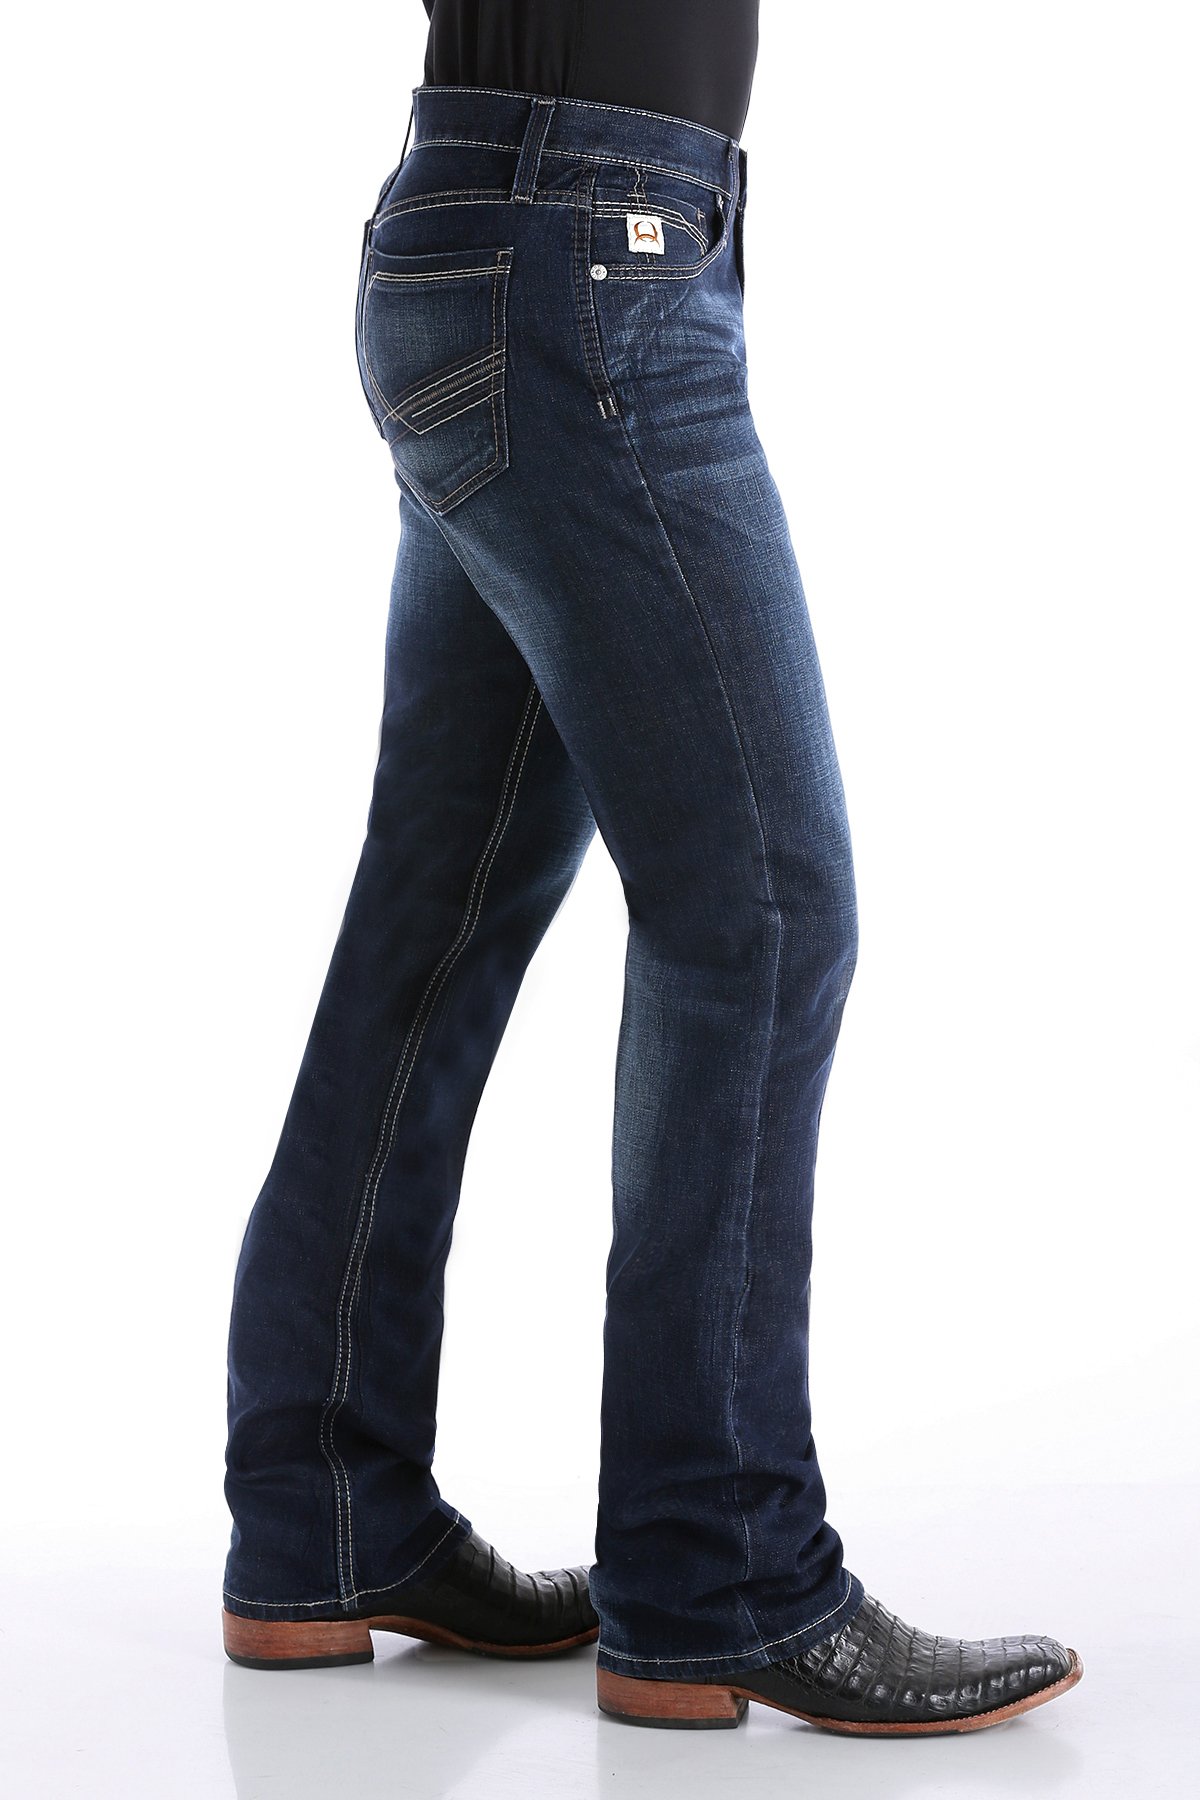 jeans-equitation-western-homme-cinch-ian